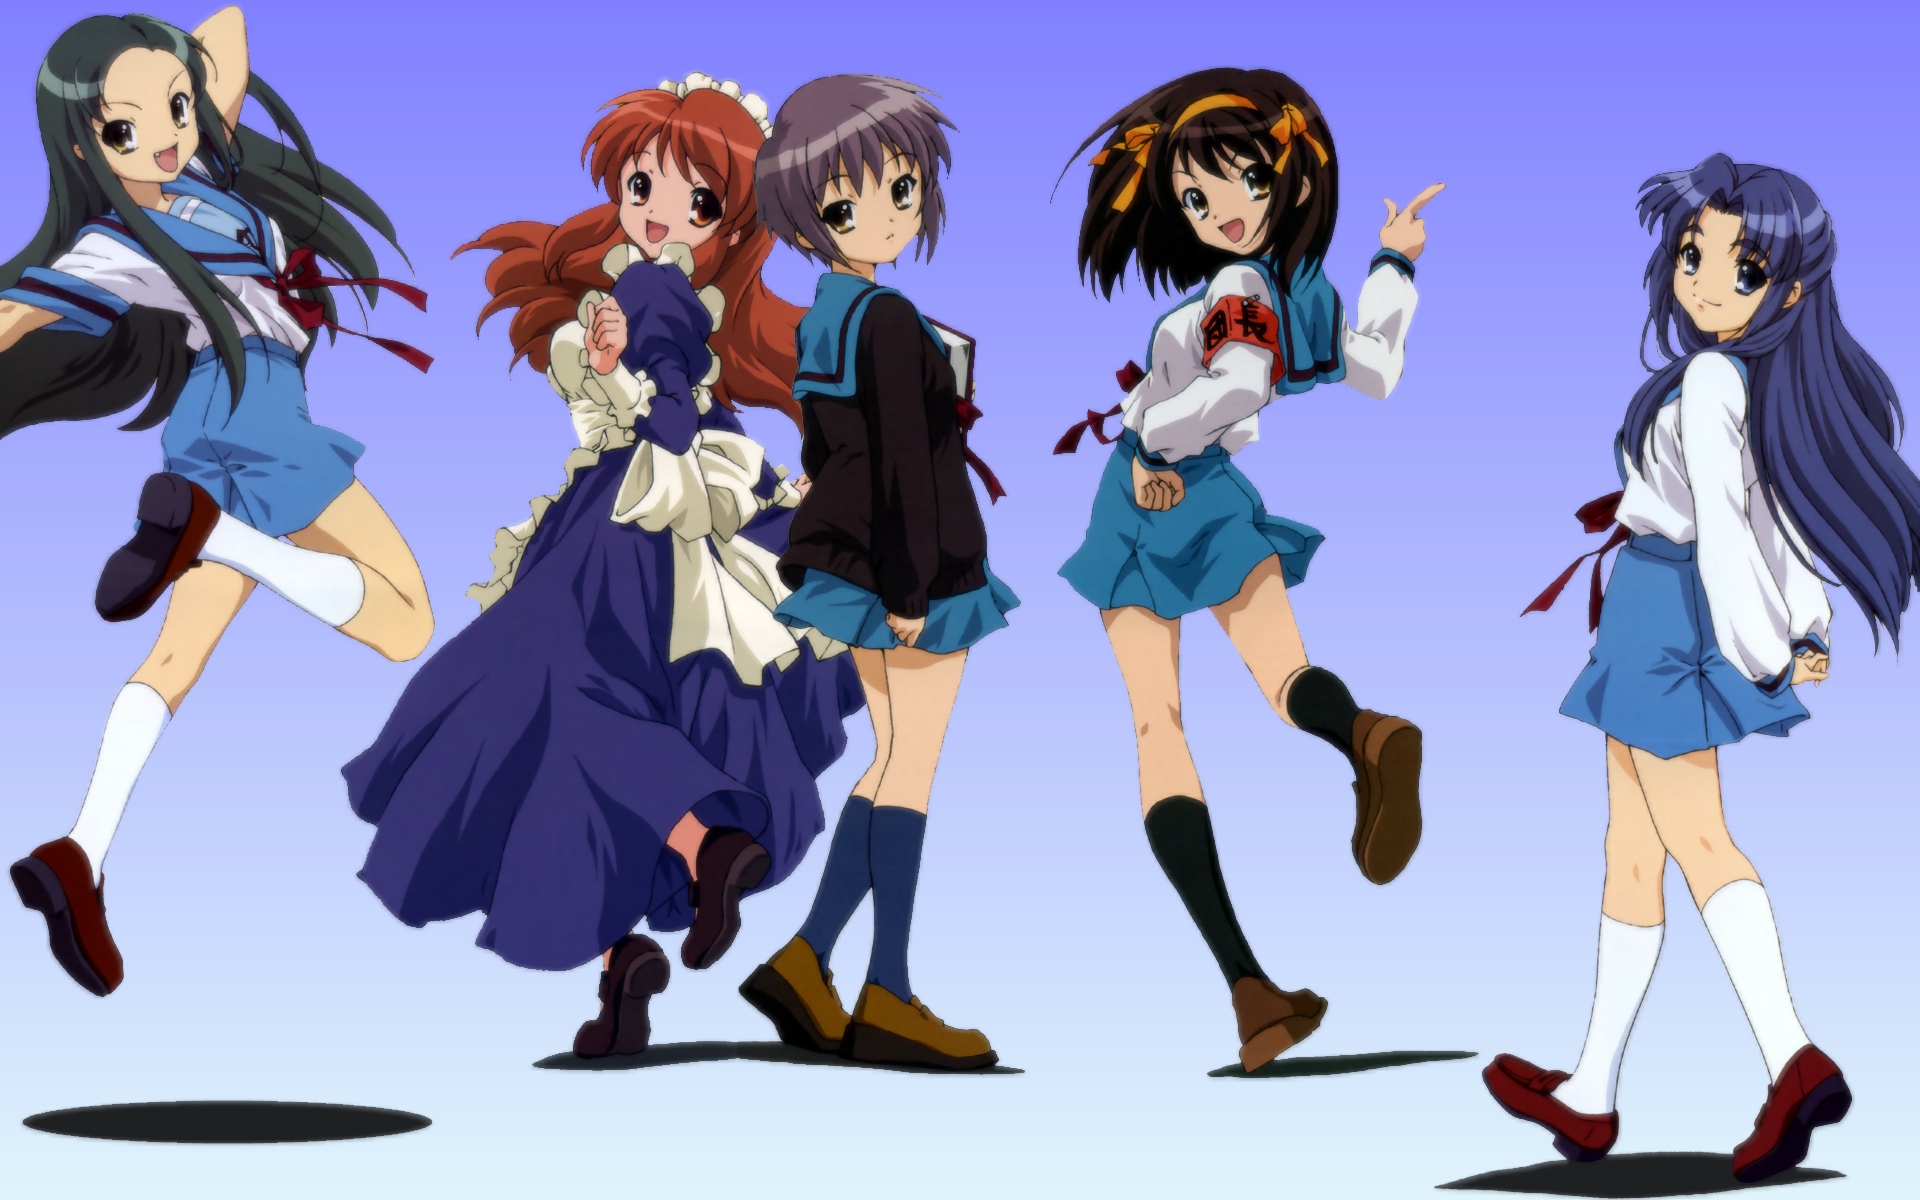 Every Haruhi Suzumiya Frame in a Random Order  The Day of Sagittarius  Frame 688 out of 2812 Frames remaining for this episode 1828 Total  frames remaining 66280  Facebook